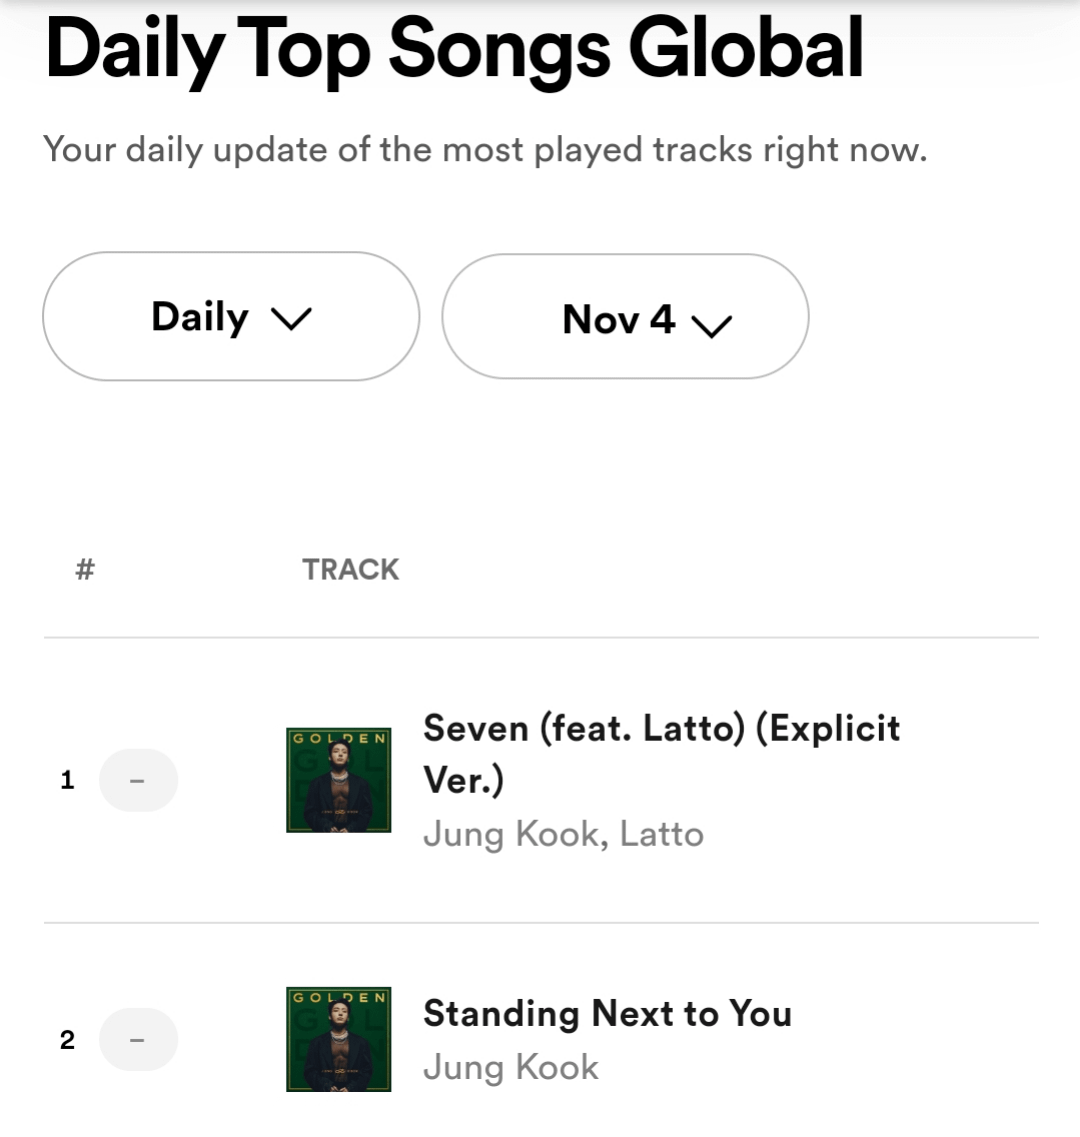 231105 Jung Kook places 2 songs from "Golden" in the Top of the Spotify Daily Top Songs Global chart for a second day running ("Seven" & "Standing Next to You")